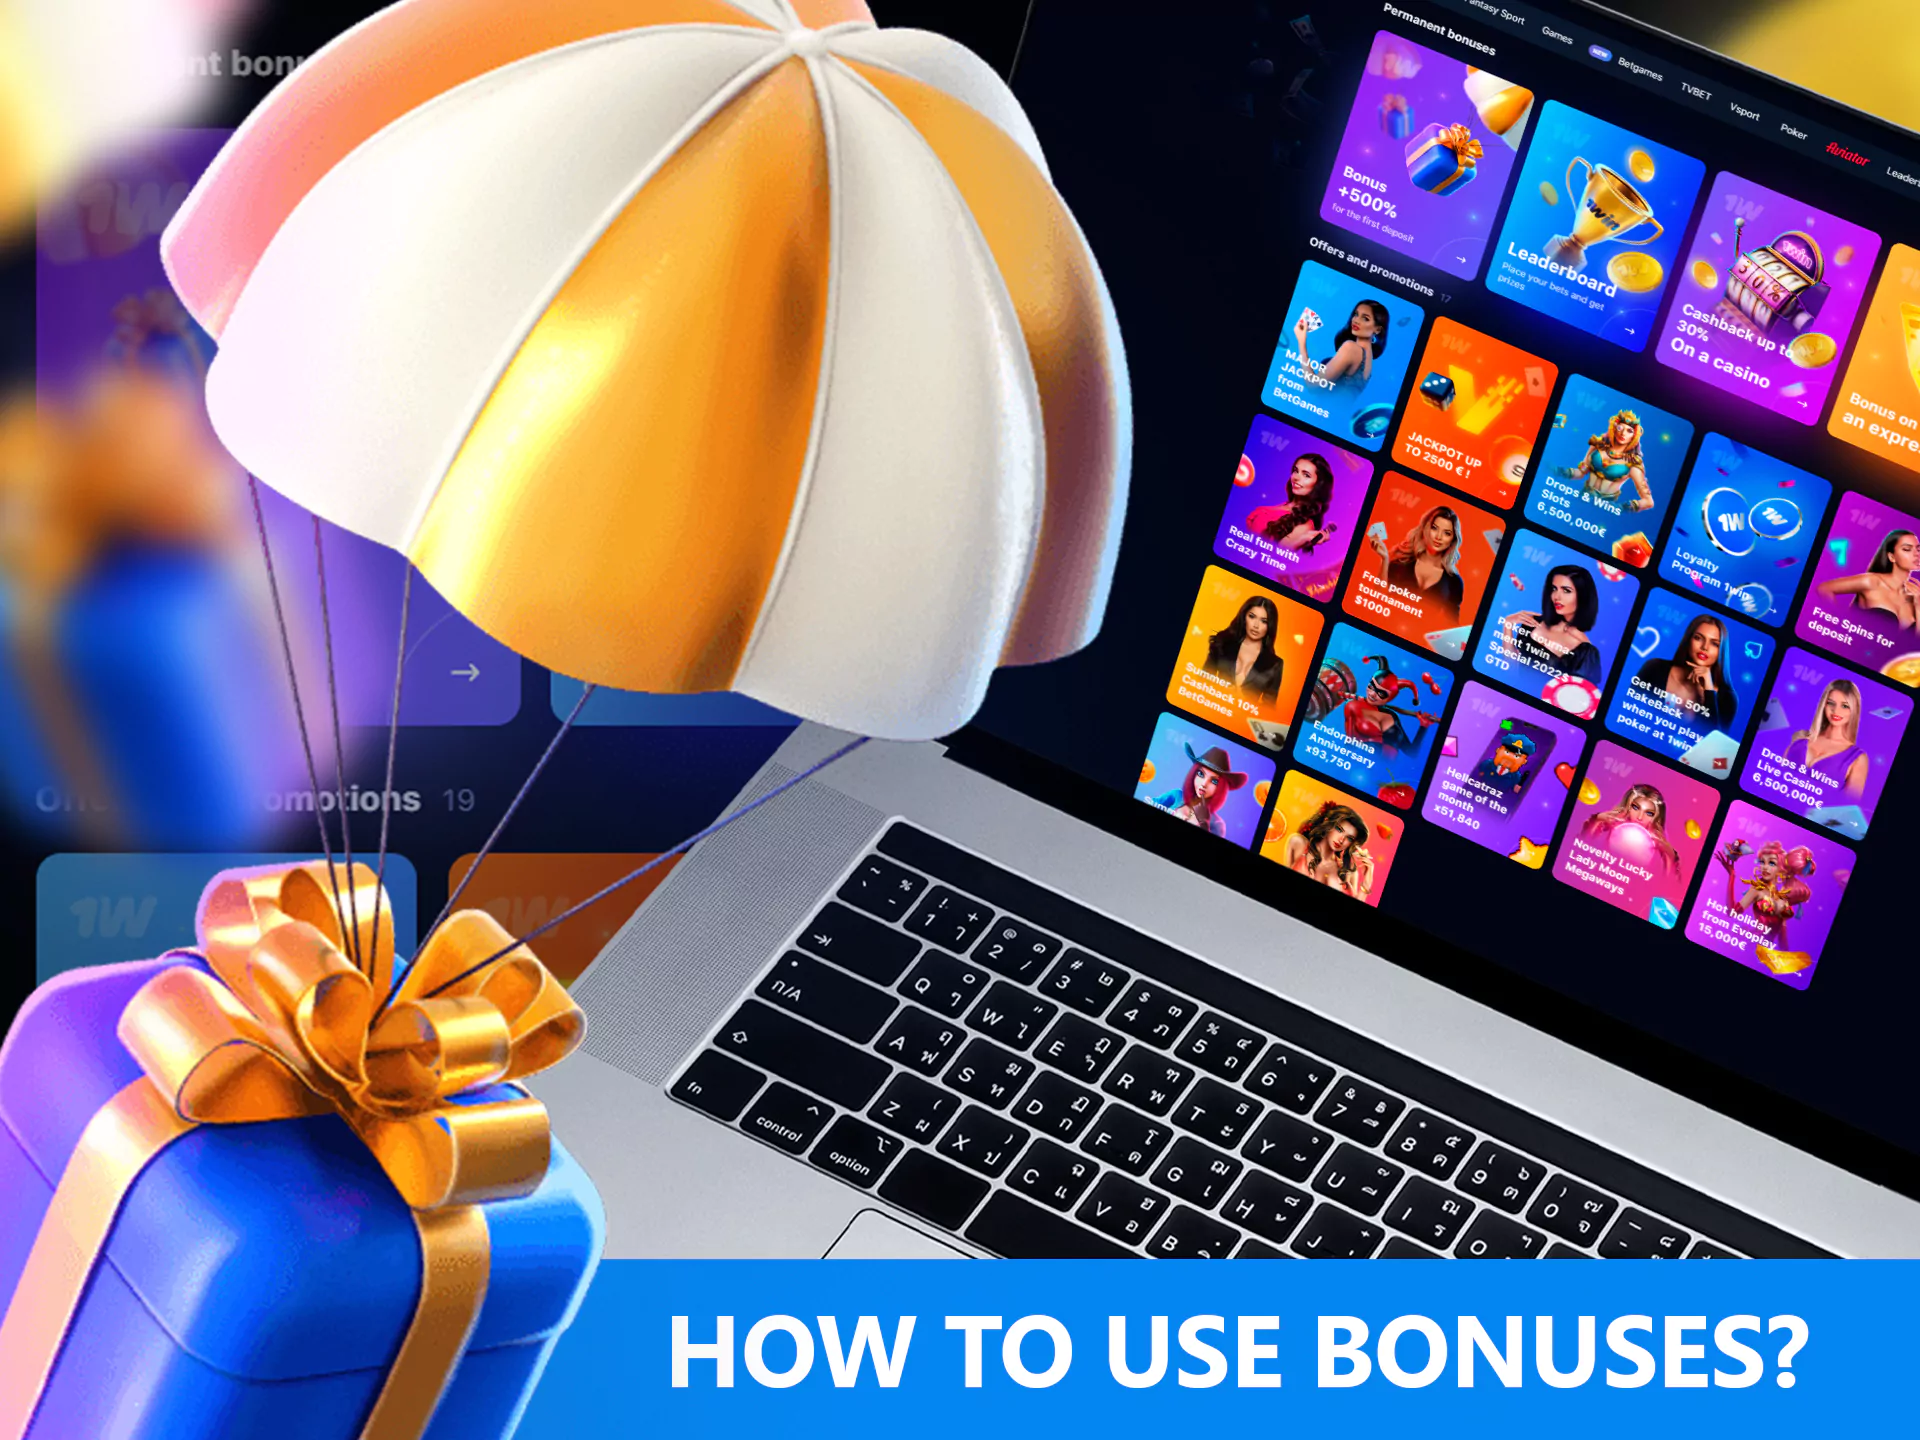 Bonuses help to increase your profit from betting or playing casino games.